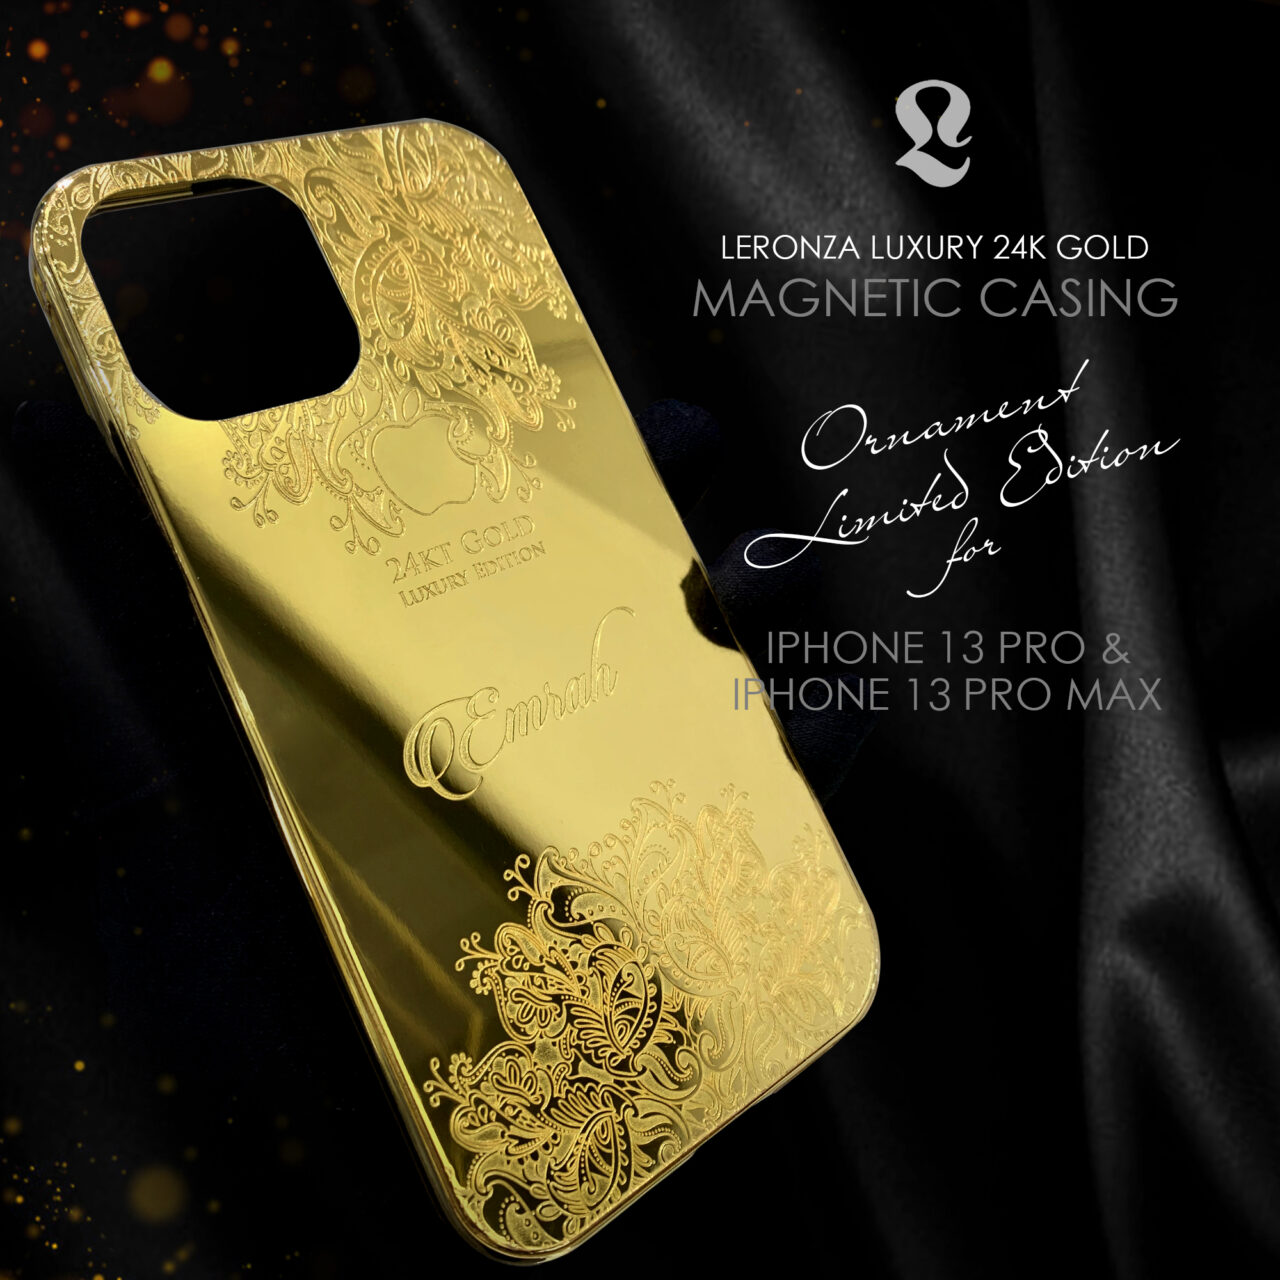 24K GOLD IPHONE 13 PRO MAX ORNAMENT CASING